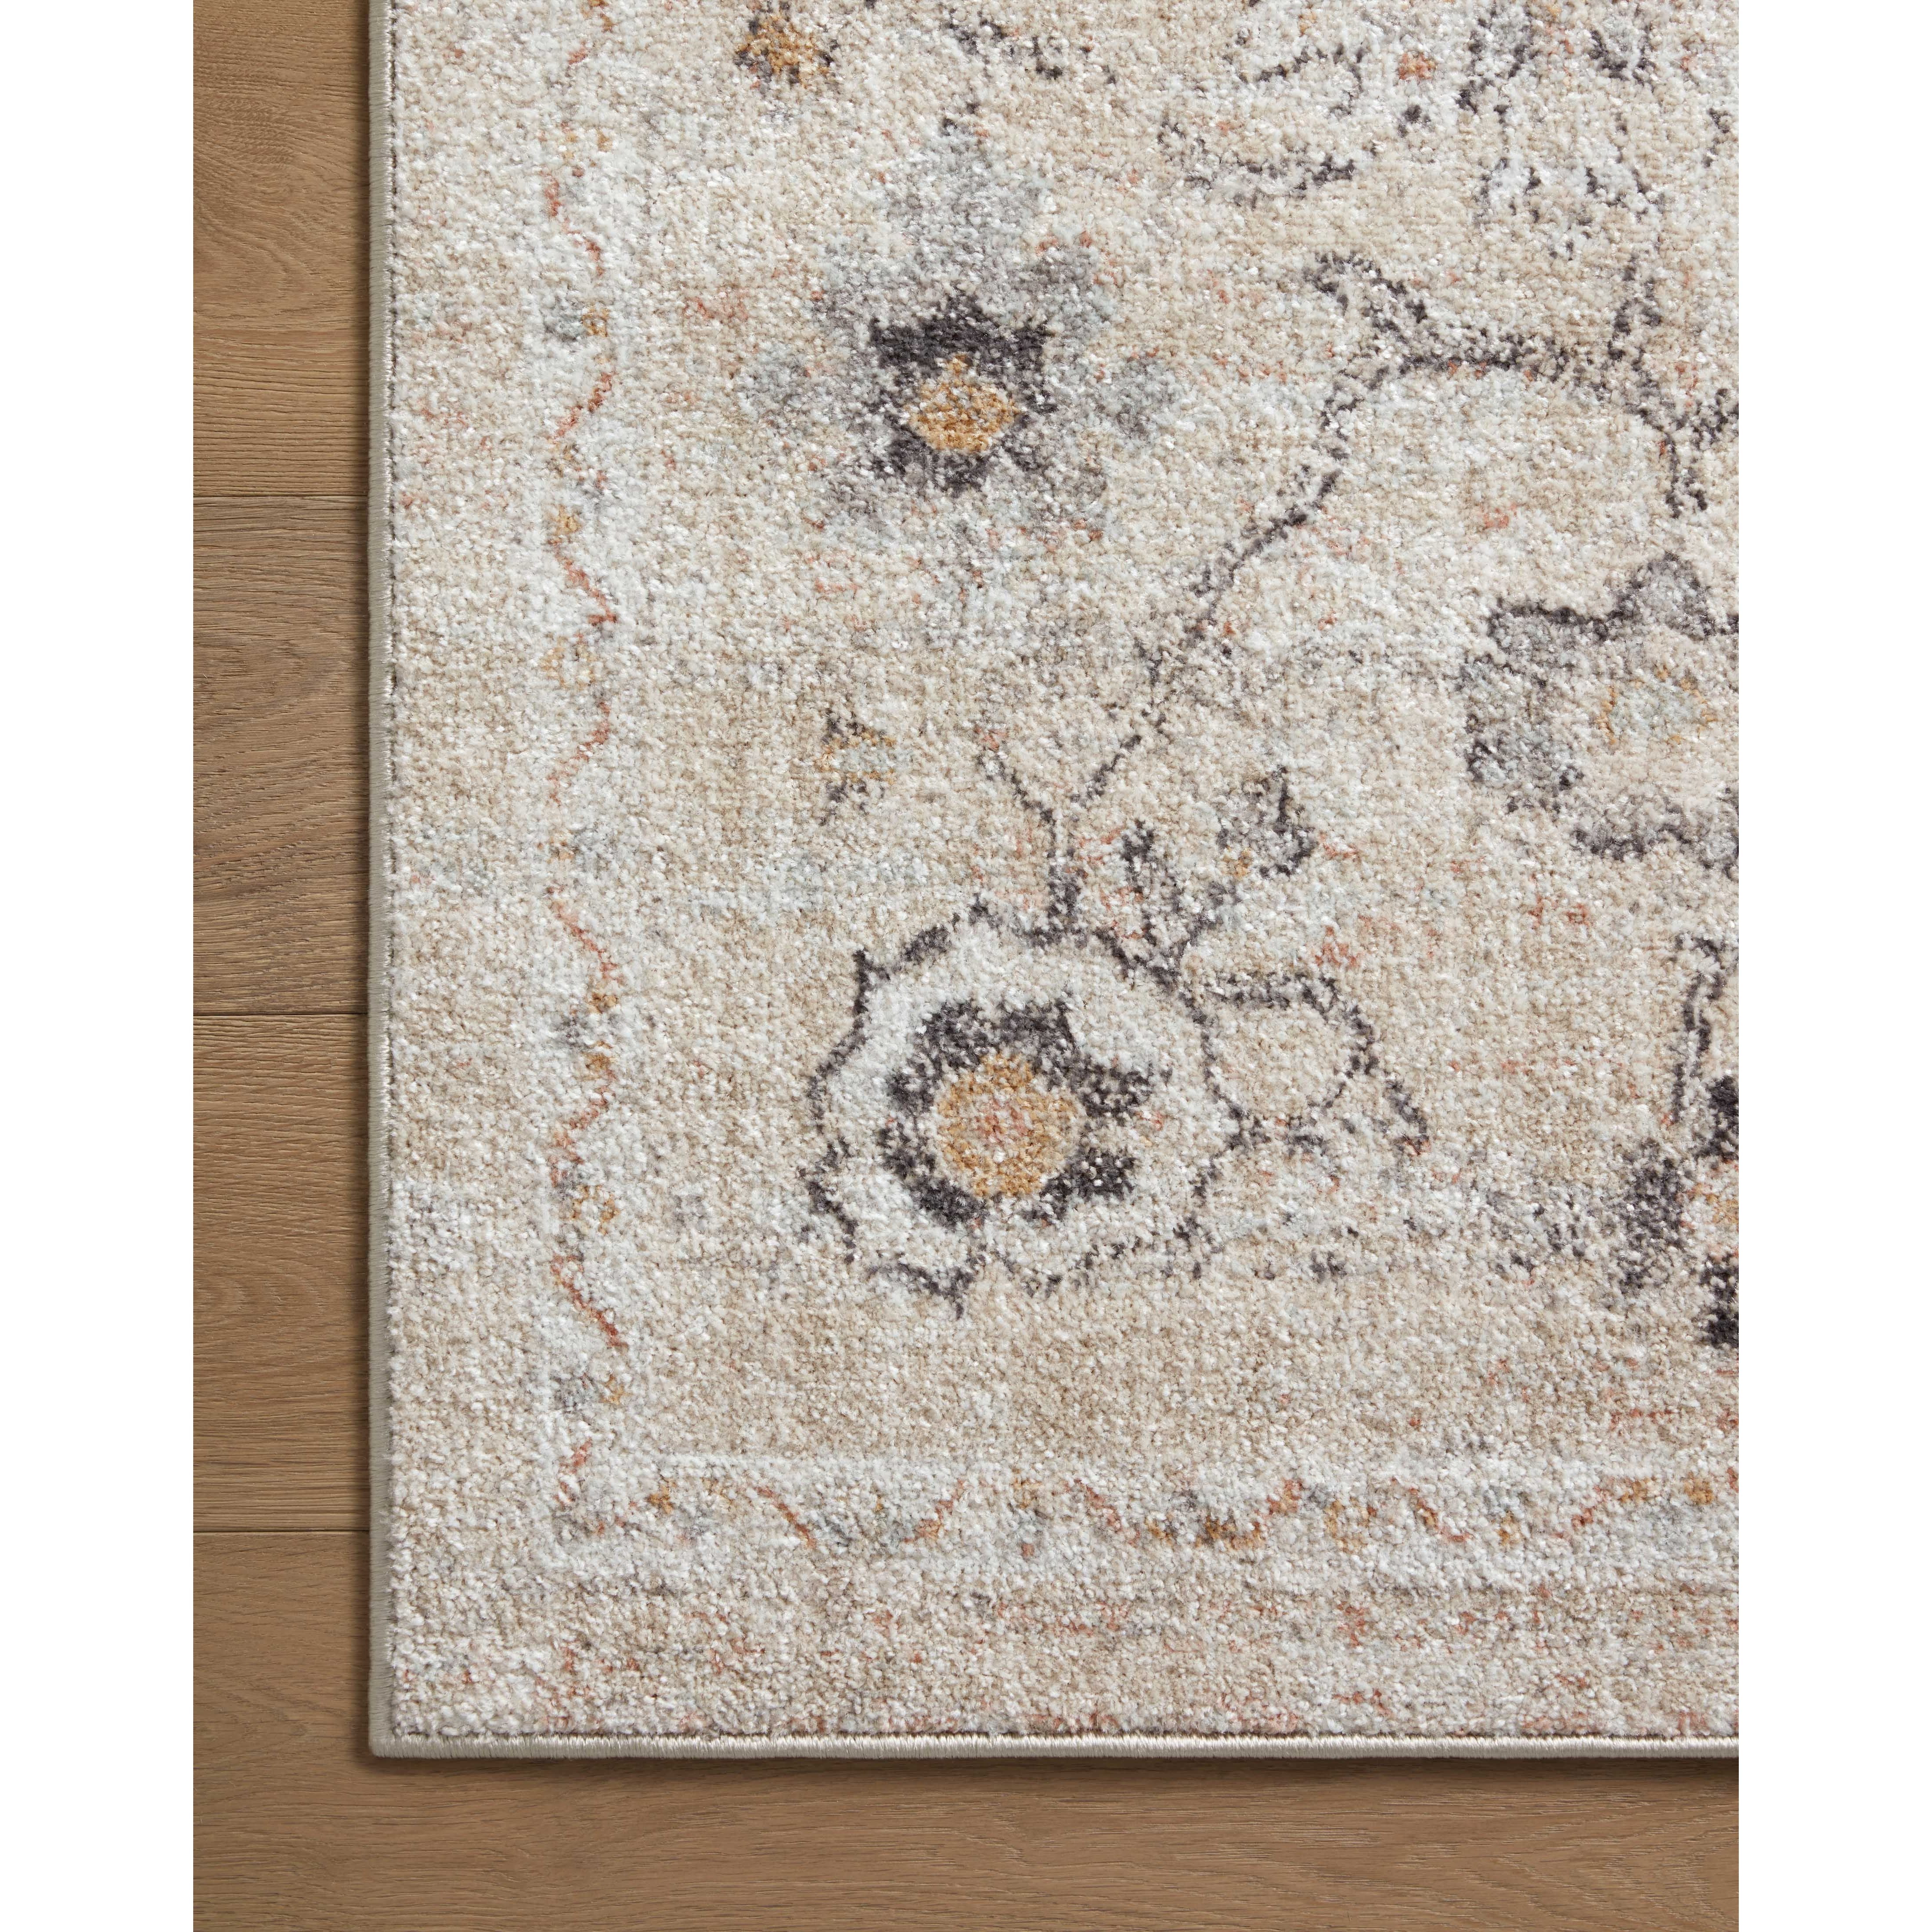 Inspired by antique Turkish Oushak carpets with large-scale motifs, the Monroe Natural / Multi Rug modernizes the traditional design in neutral palettes, many of which have black details that anchor the rug in the room. Monroe is power-loomed of 100% polypropylene for easy care and reliable durability. Amethyst Home provides interior design, new home construction design consulting, vintage area rugs, and lighting in the Dallas metro area.